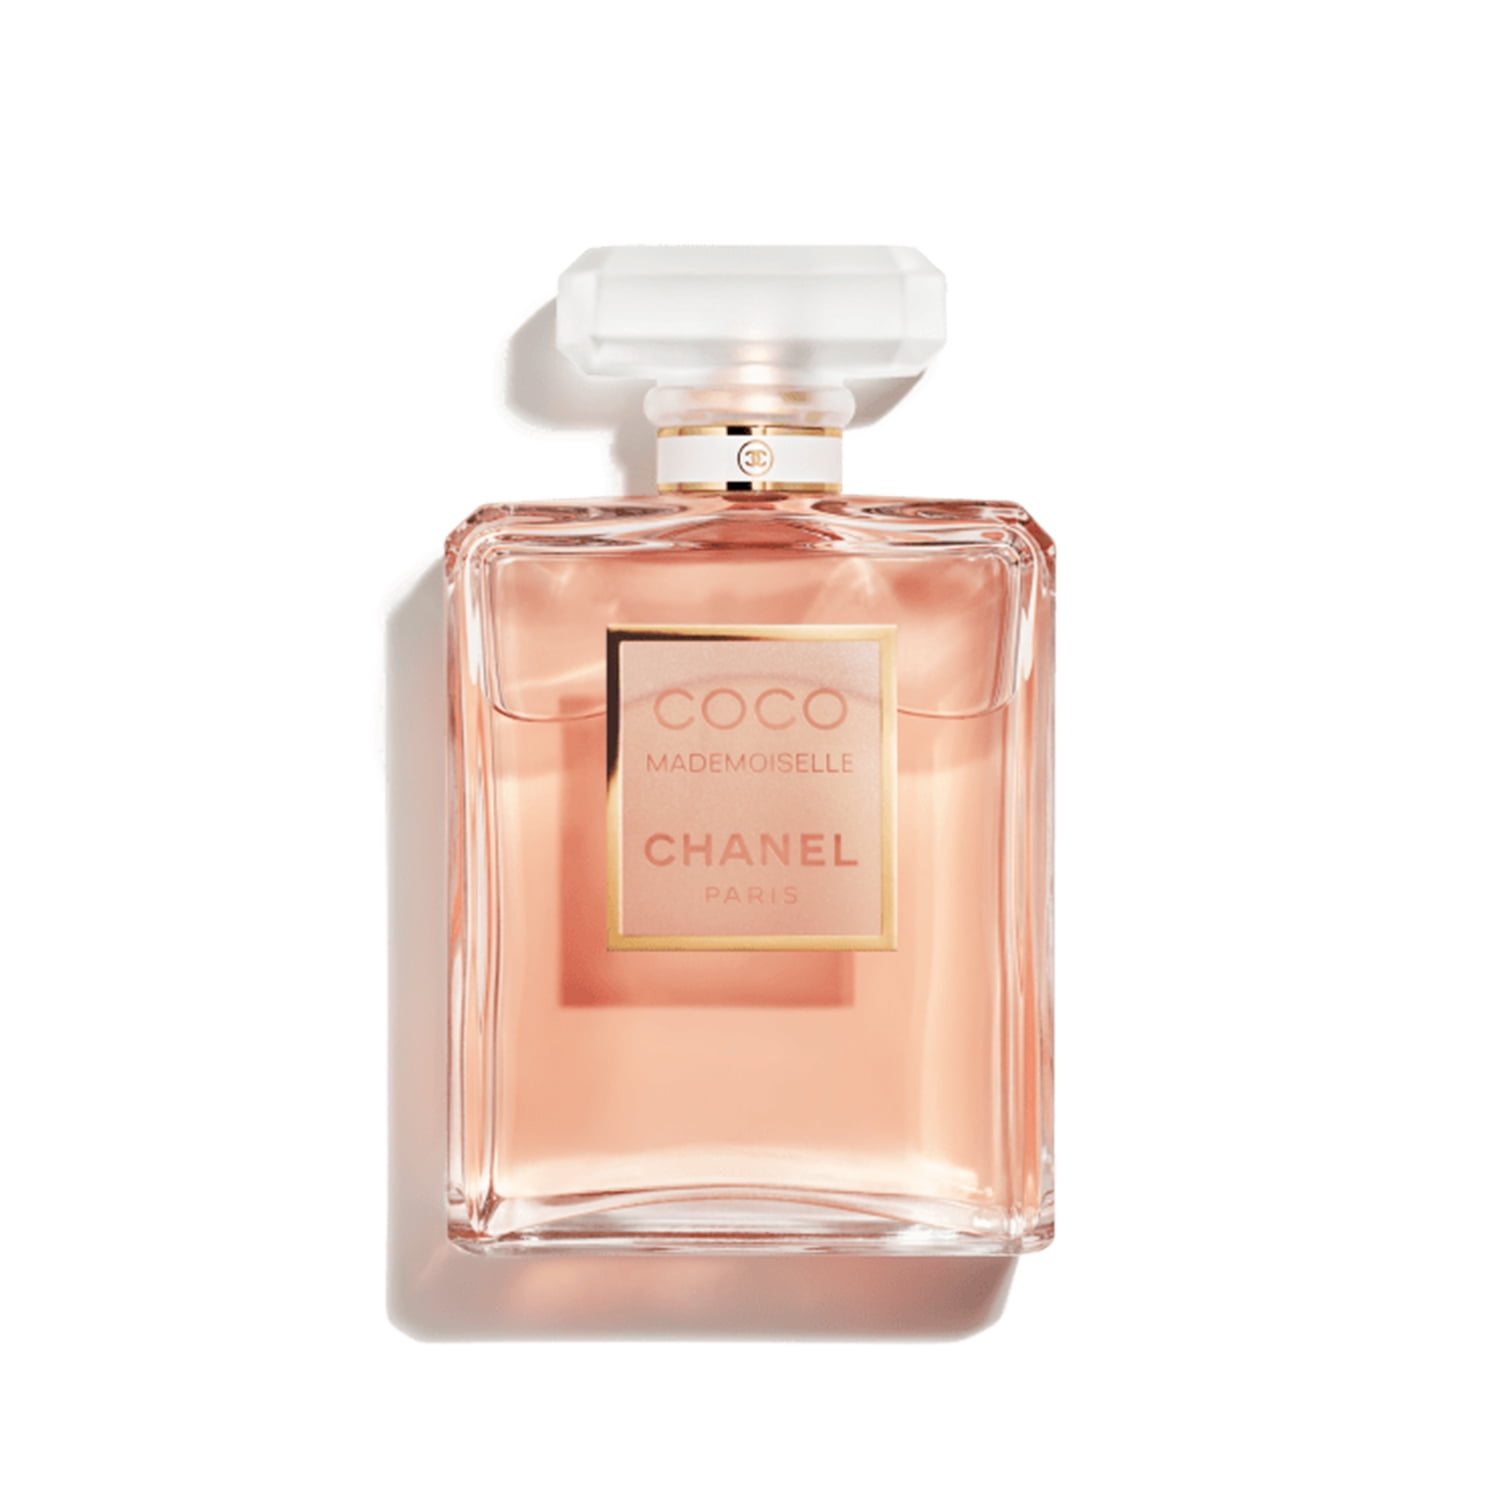 CHANEL COCO EAU DE PARFUM 3.4oz SPRAY w/ Tester Box (BRAND NEW) 100%  AUTHENTIC! READY TO SHIP! WOMEN FRAGRANCE PERFUME (RETAIL $135) for Sale in